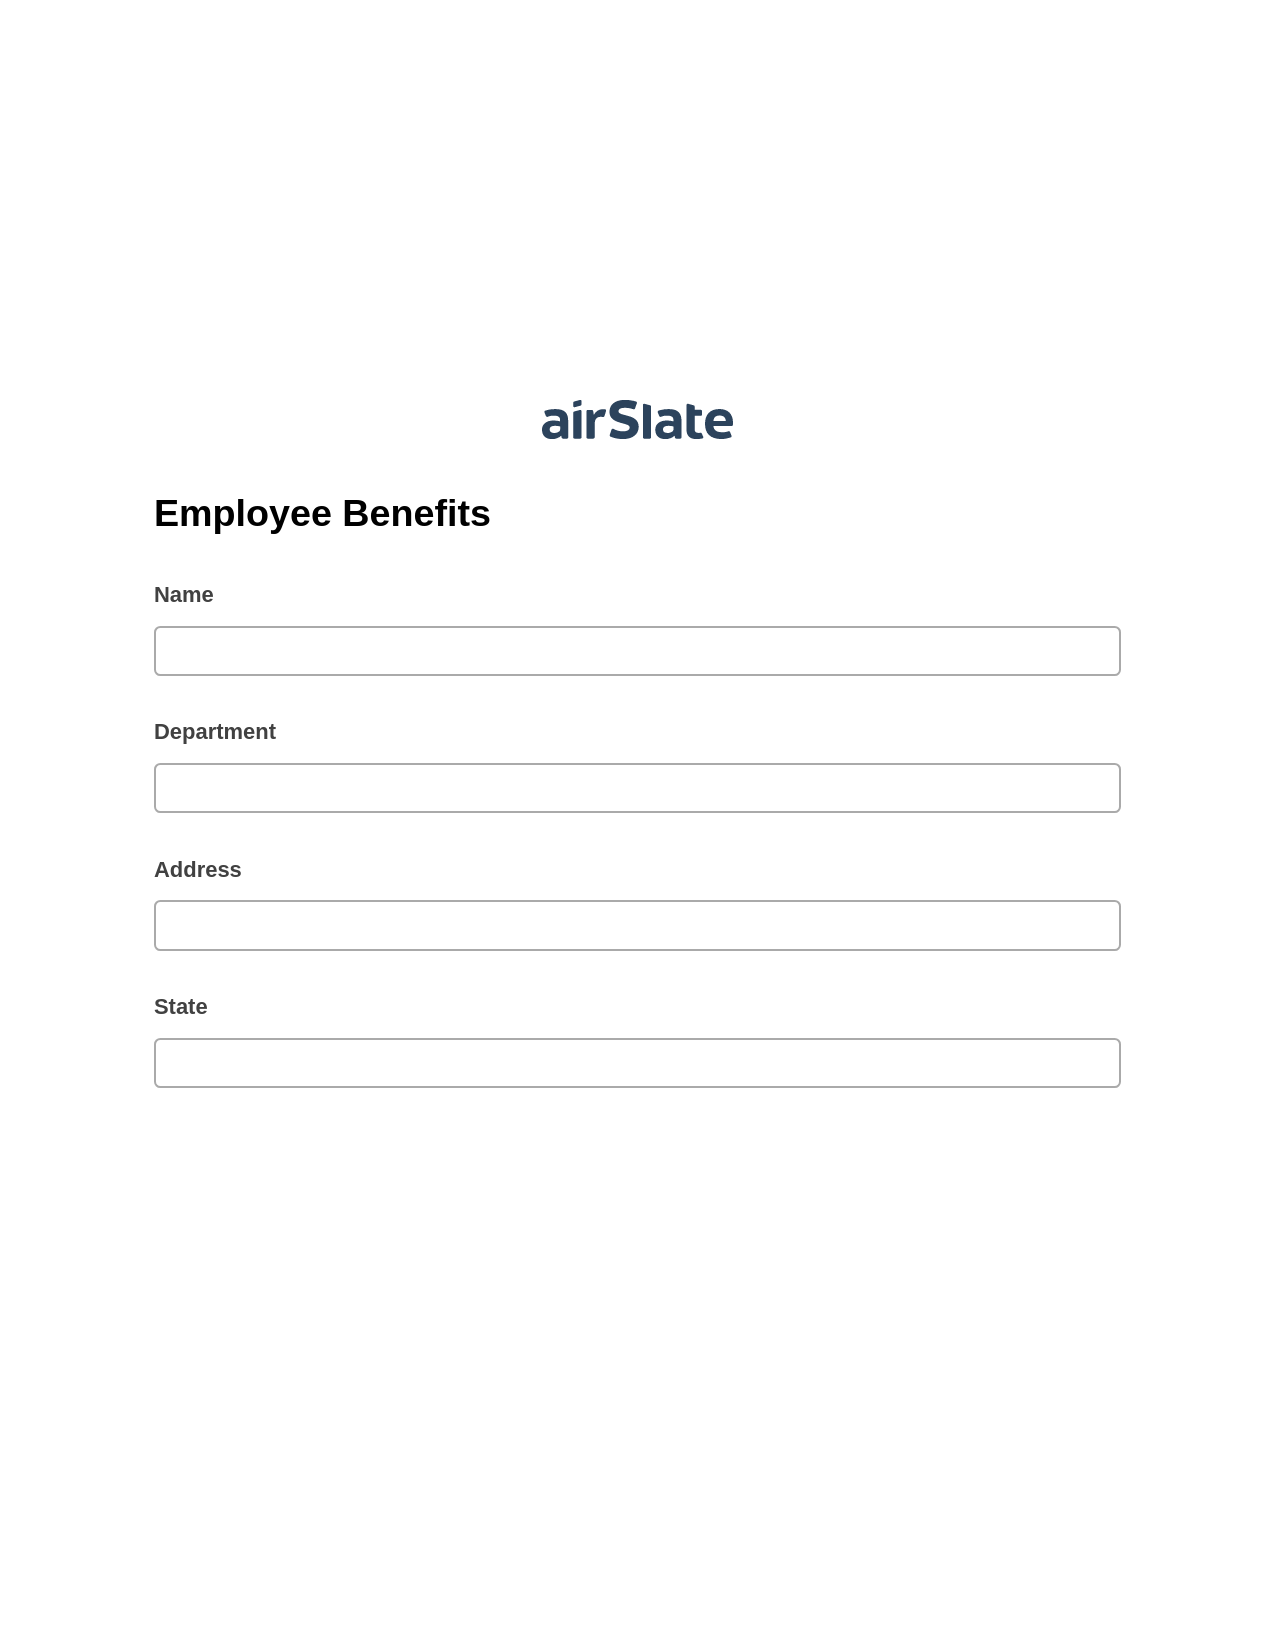 Employee Benefits Pre-fill from CSV File Bot, Add Tags to Slate Bot, Export to Excel 365 Bot